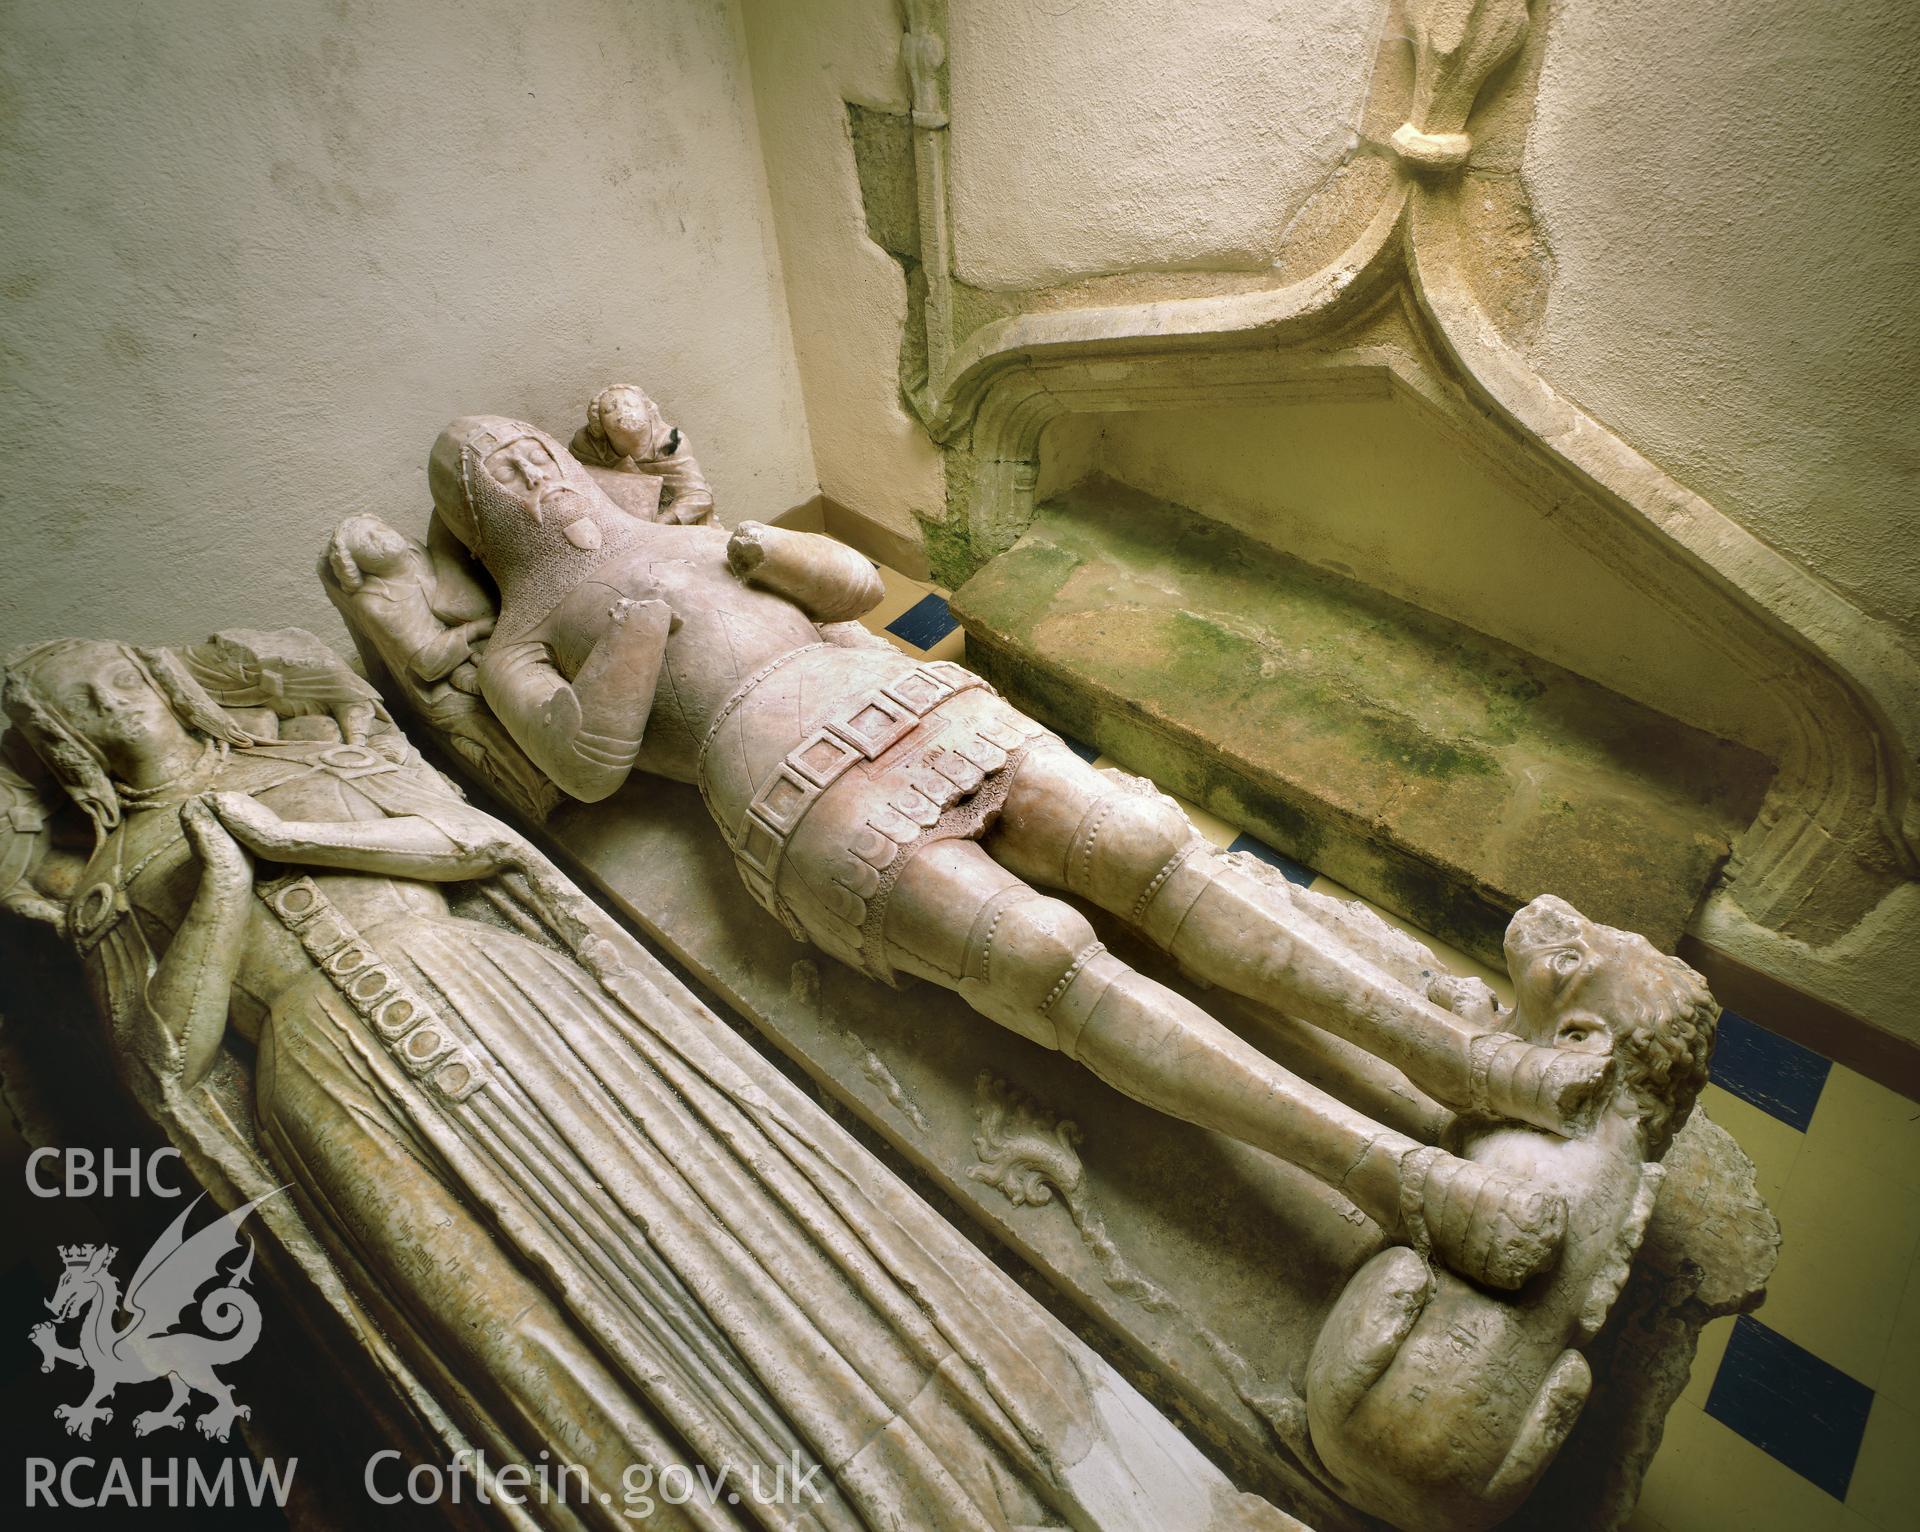 RCAHMW colour transparency showing view of an alabaster tomb in St Gredifael's Church, Penmynydd.